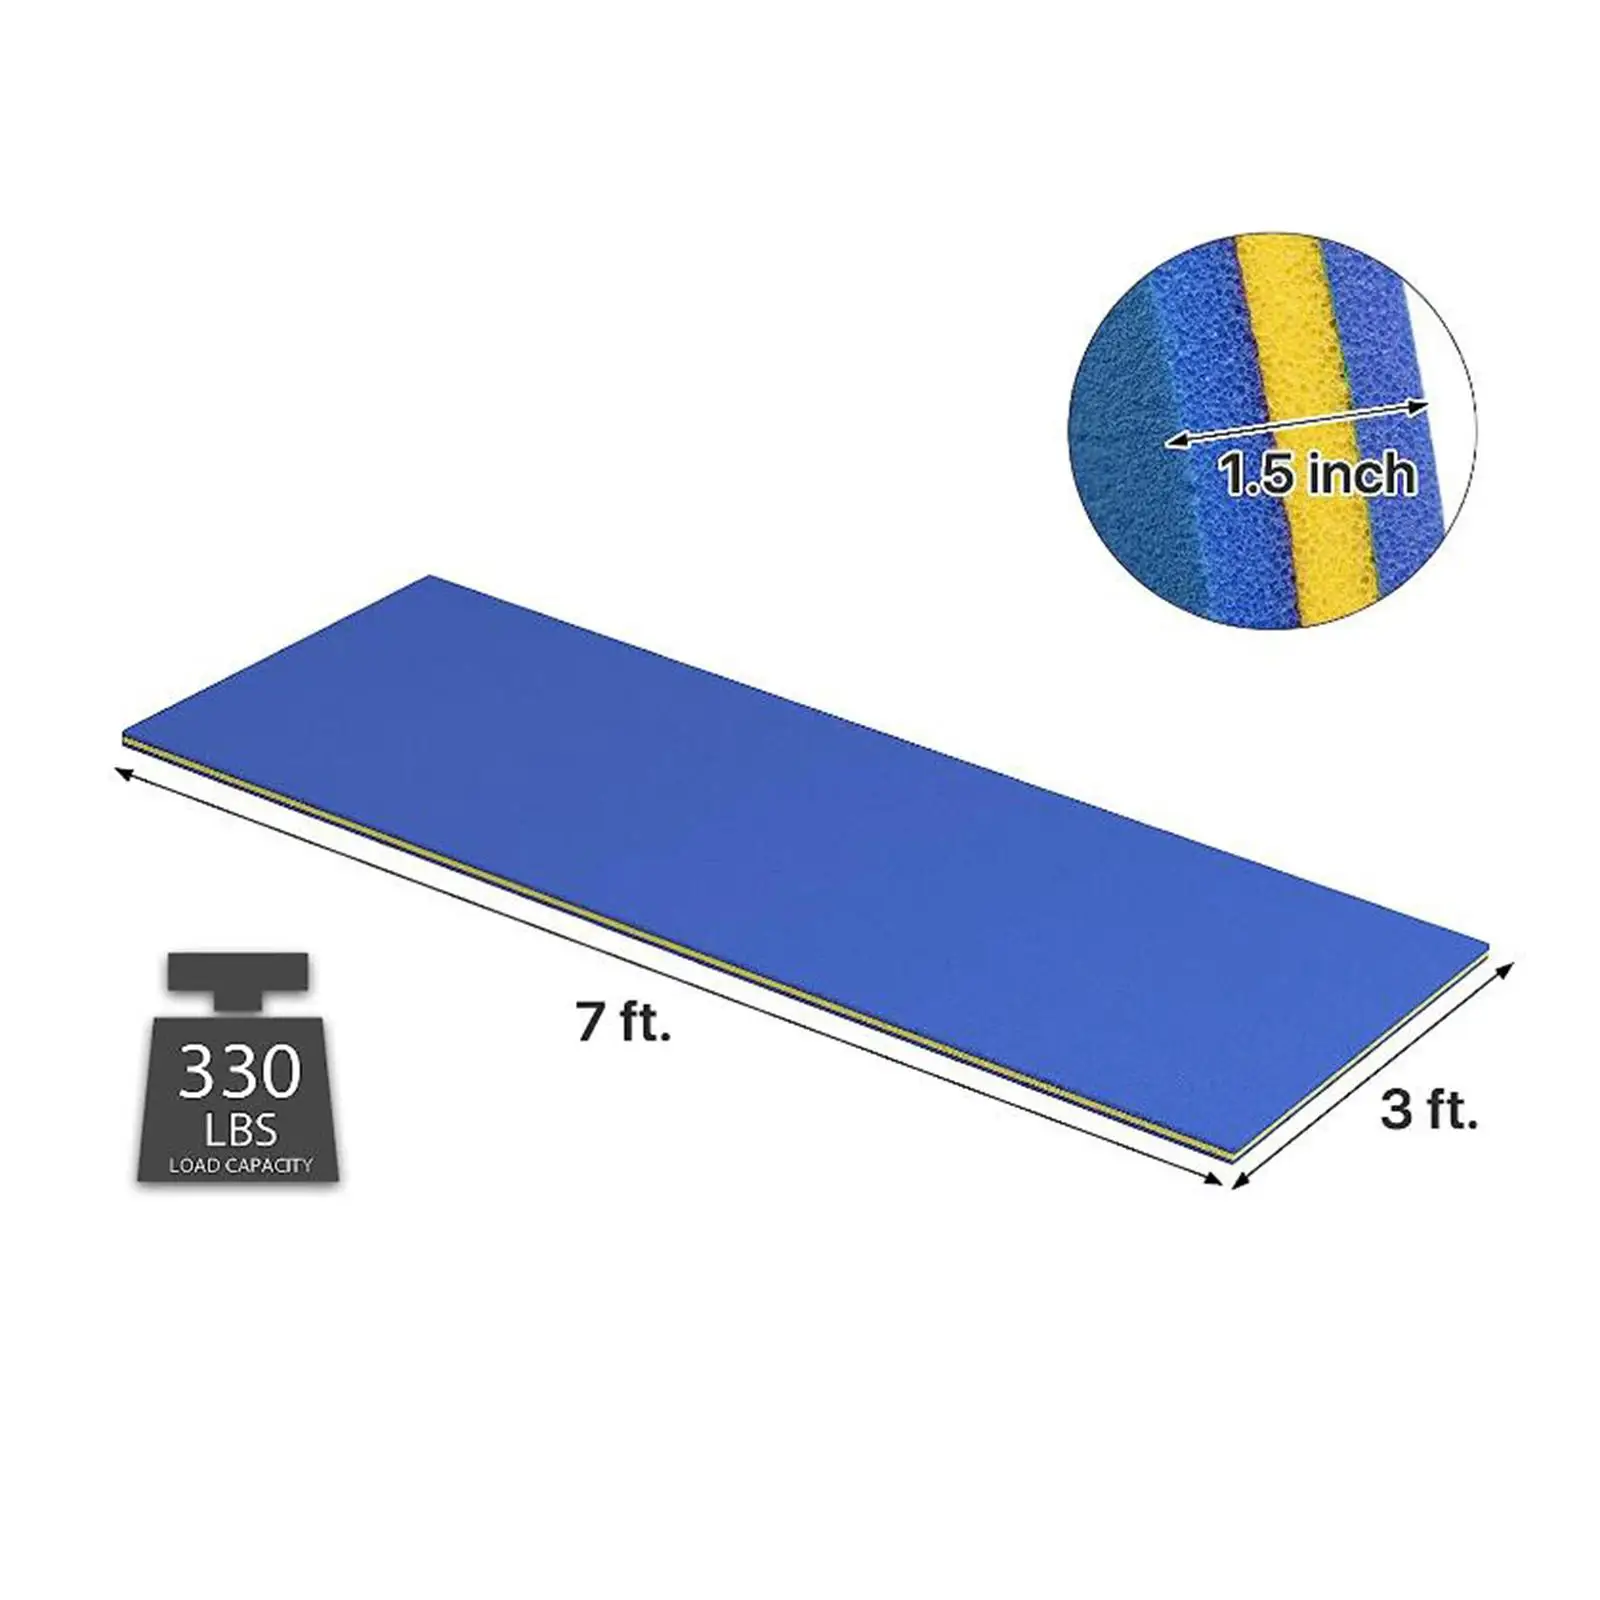 Floating Mat Cushion Pad 180x55x3.3cm Simple to Clean with Soap and Water Lightweight Durable Water Bed for Kids, Teens